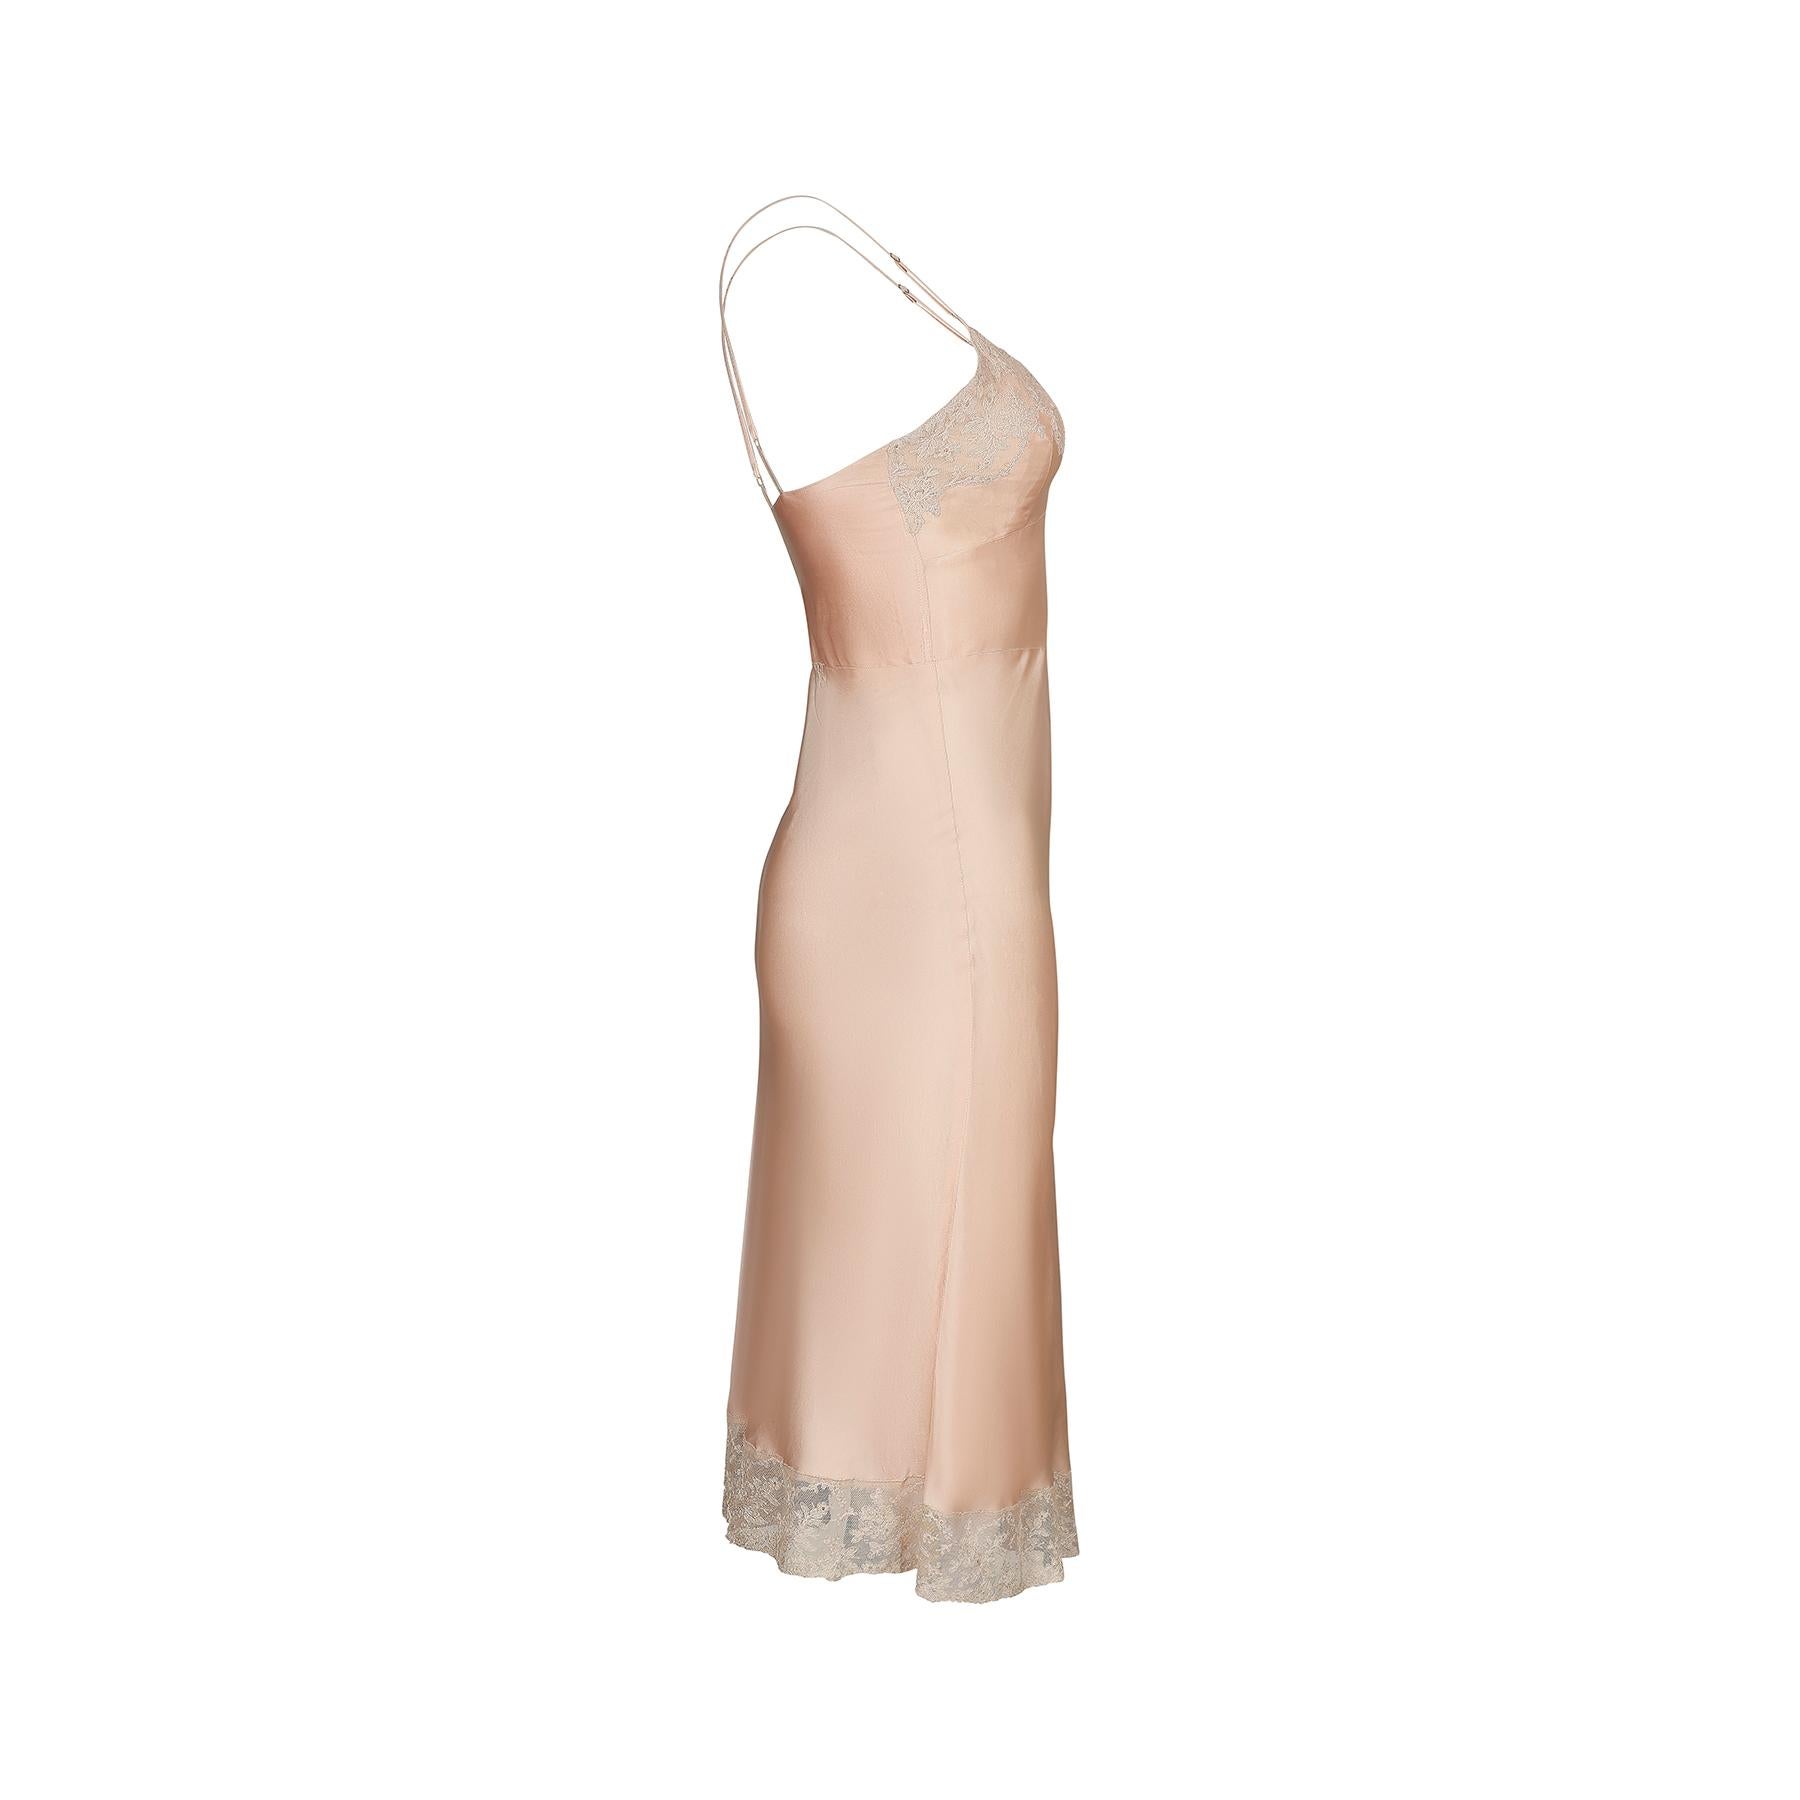 An original 1940s blush pink silk and lace slip with a fantastic retail label from upmarket department store Bonwit Teller of 5th Ave, New York. This is as good as it gets and this particular dress is in pristine vintage condition.

It has a